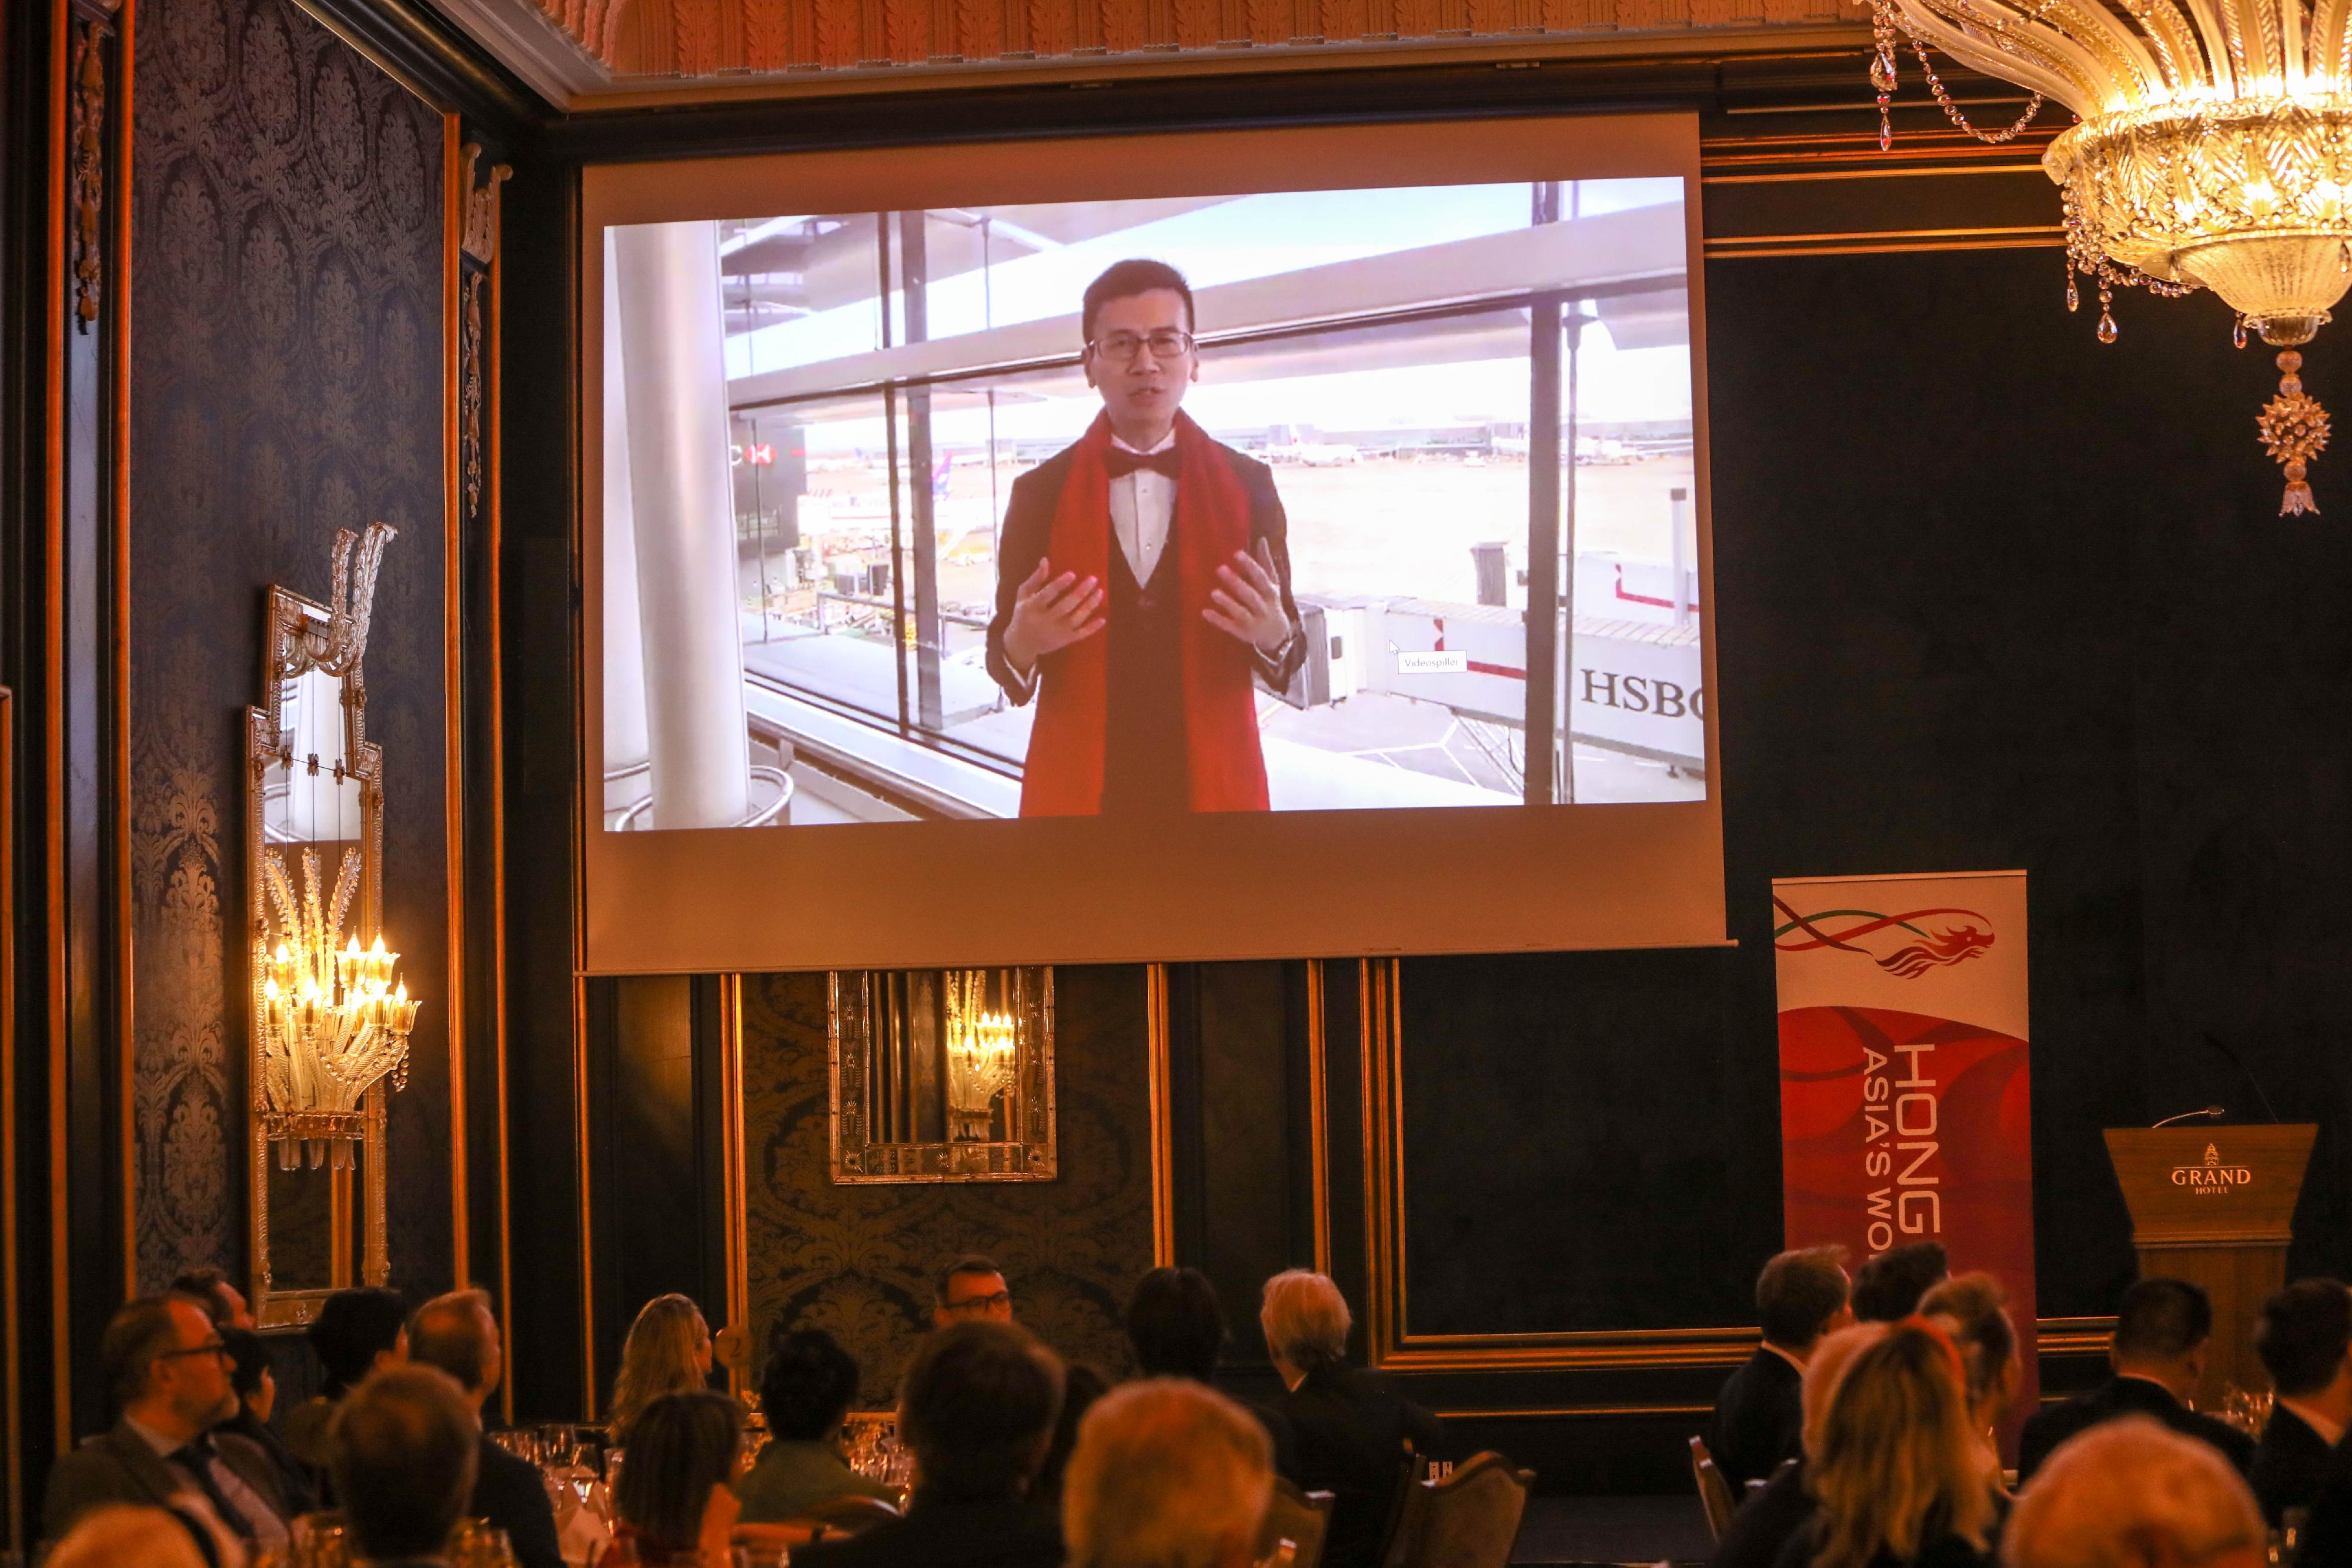 The Hong Kong Economic and Trade Office, London (London ETO) co-hosted receptions in Oslo, Norway, and Helsinki, Finland, with local business associations on January 30 and February 1 respectively for celebrating the Year of the Rabbit. Photo shows the Director-General of the London ETO, Mr Gilford Law, delivering a speech in video format at the Oslo reception.